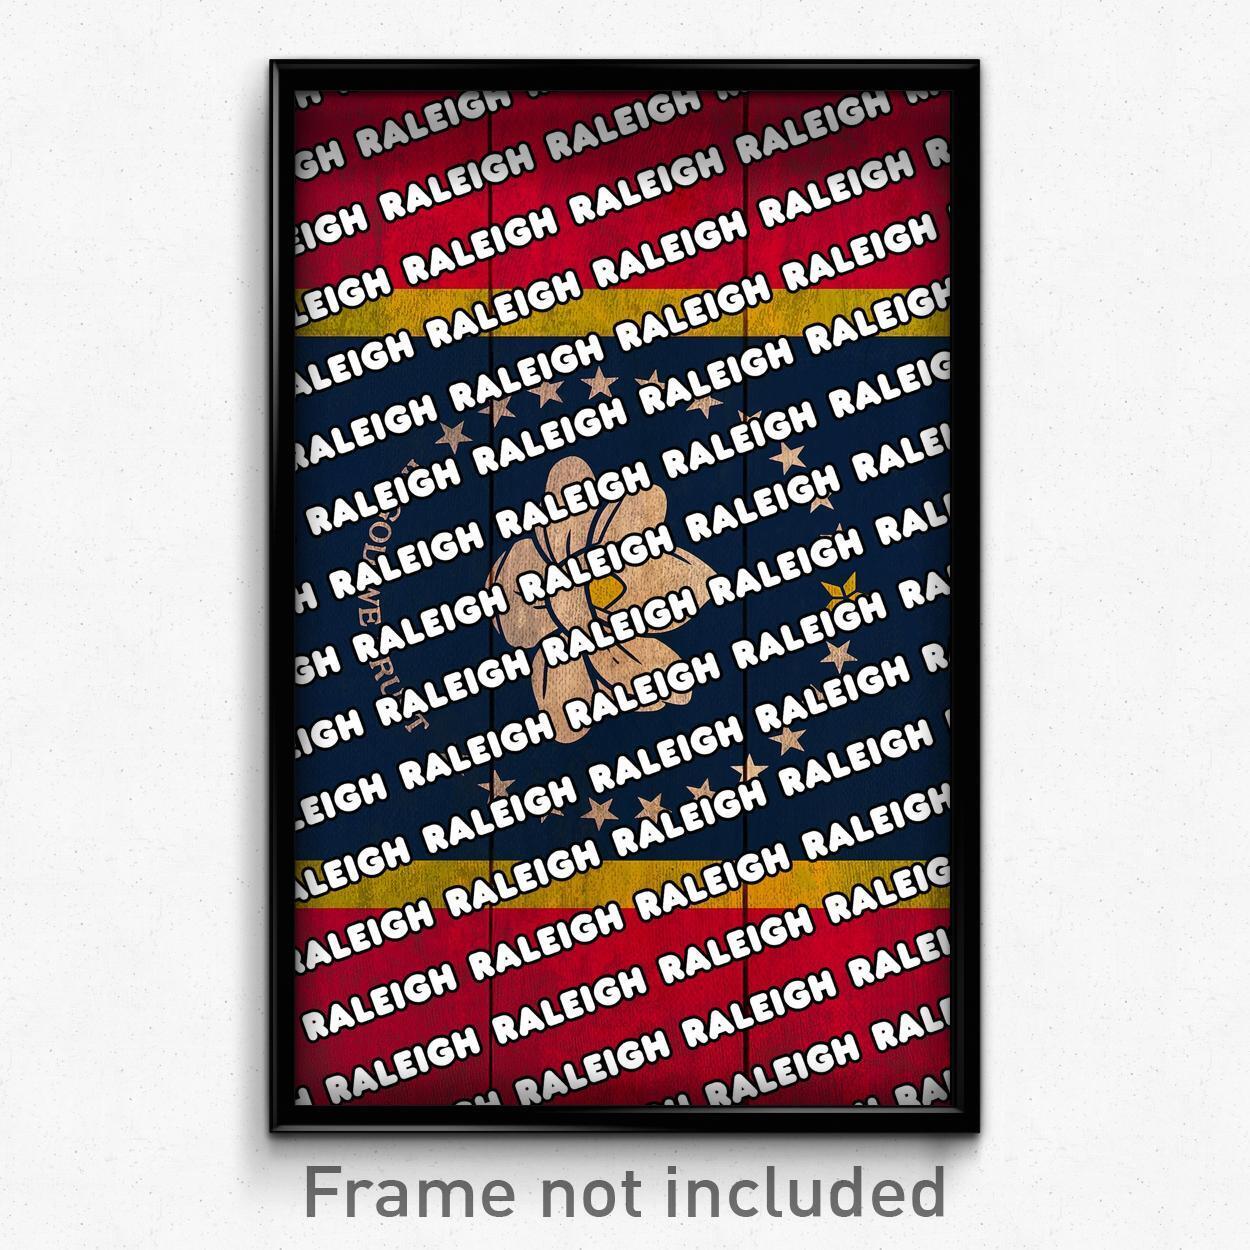 Raleigh Mississippi Poster (MS City Souvenir 11x17 Town Print)